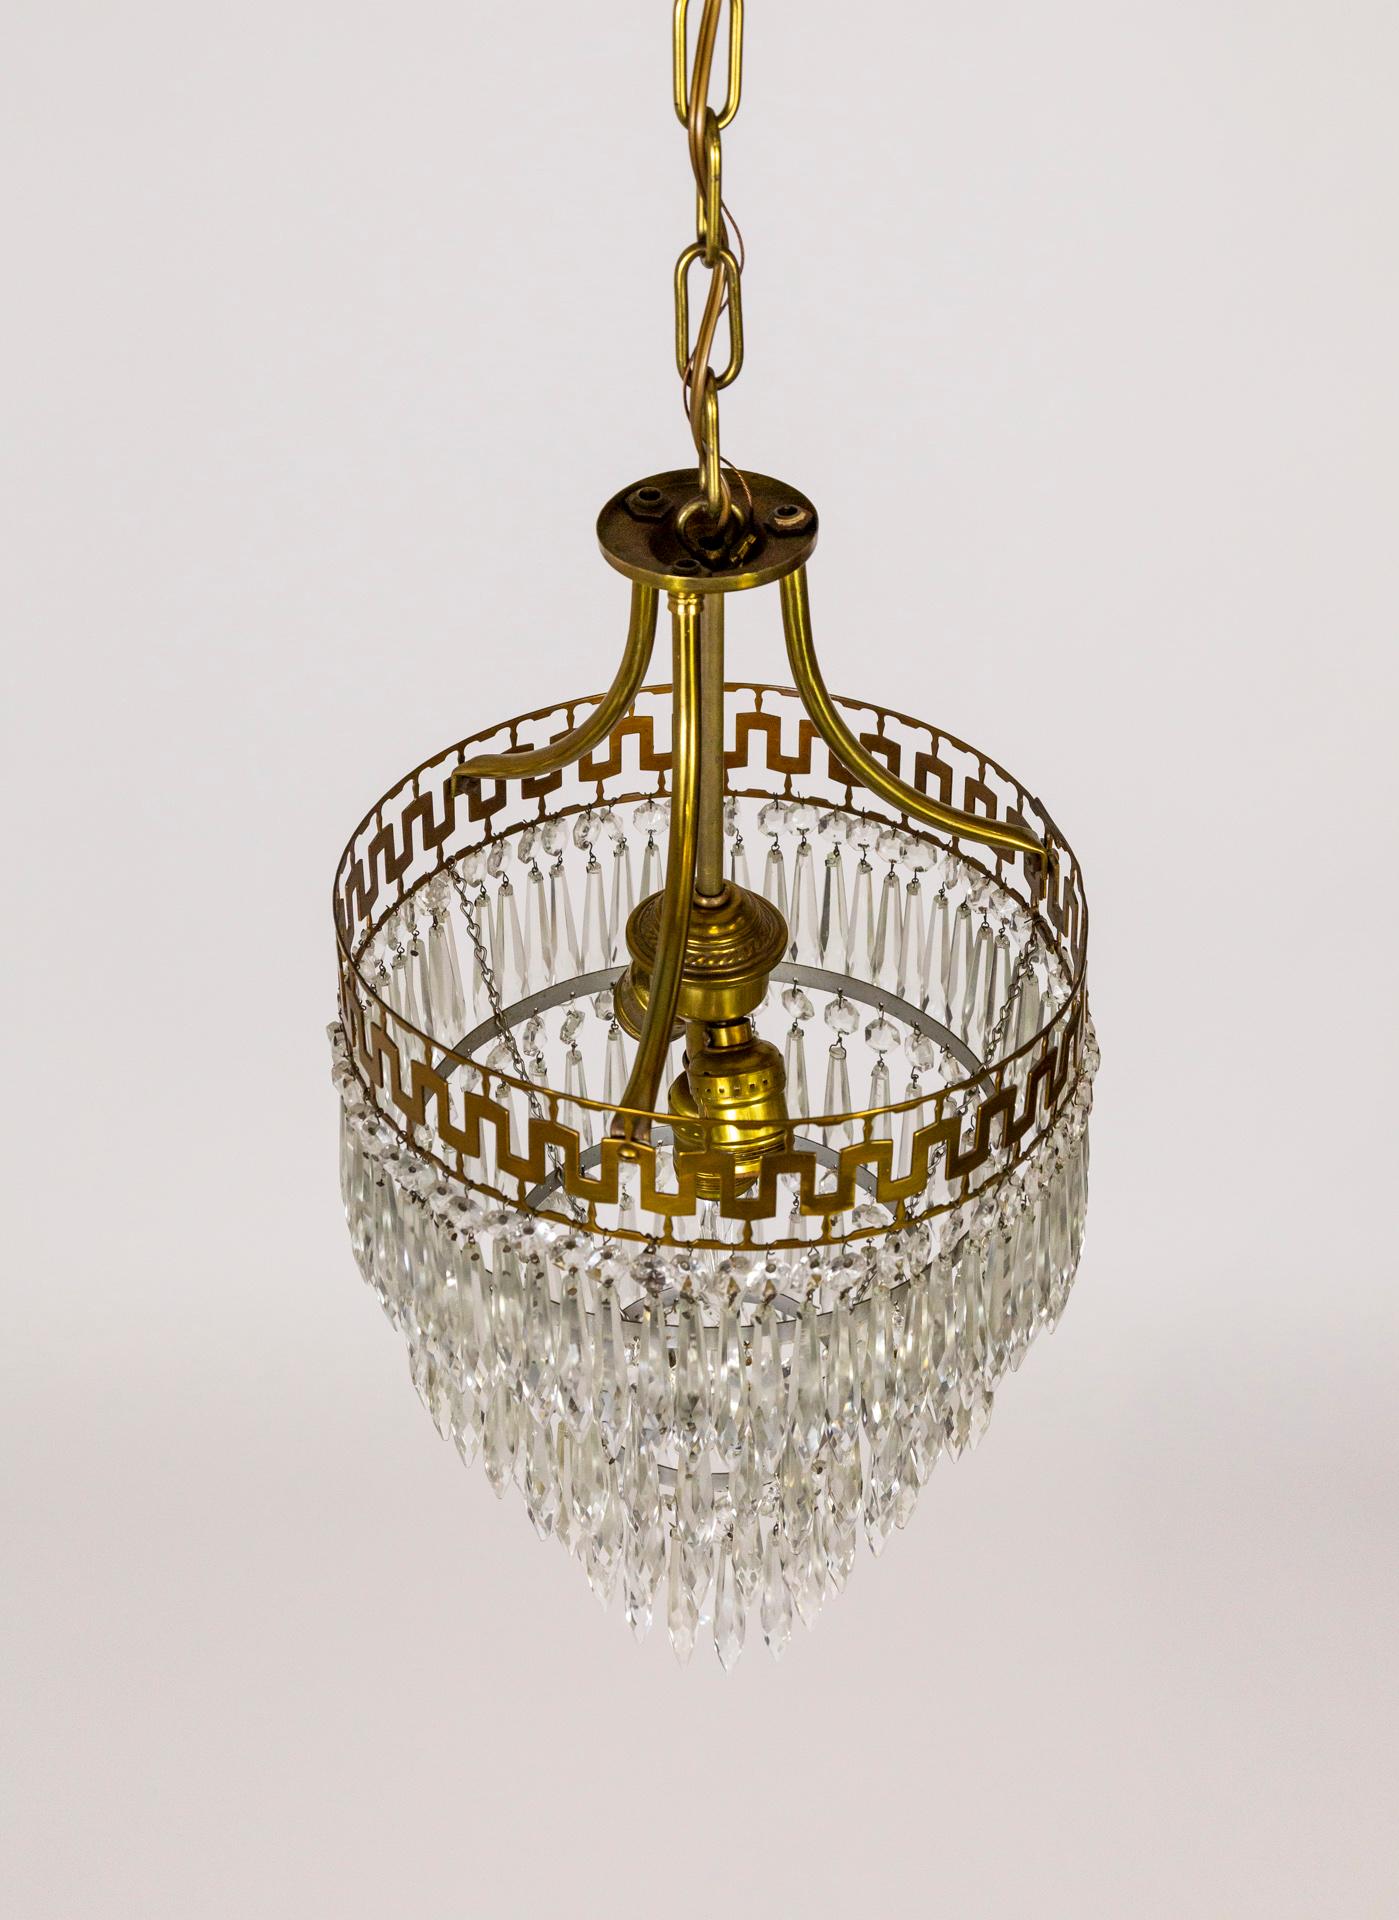 Mid-20th Cent. Neoclassical Cut Brass & Crystal Wedding Cake Pendant Light For Sale 1